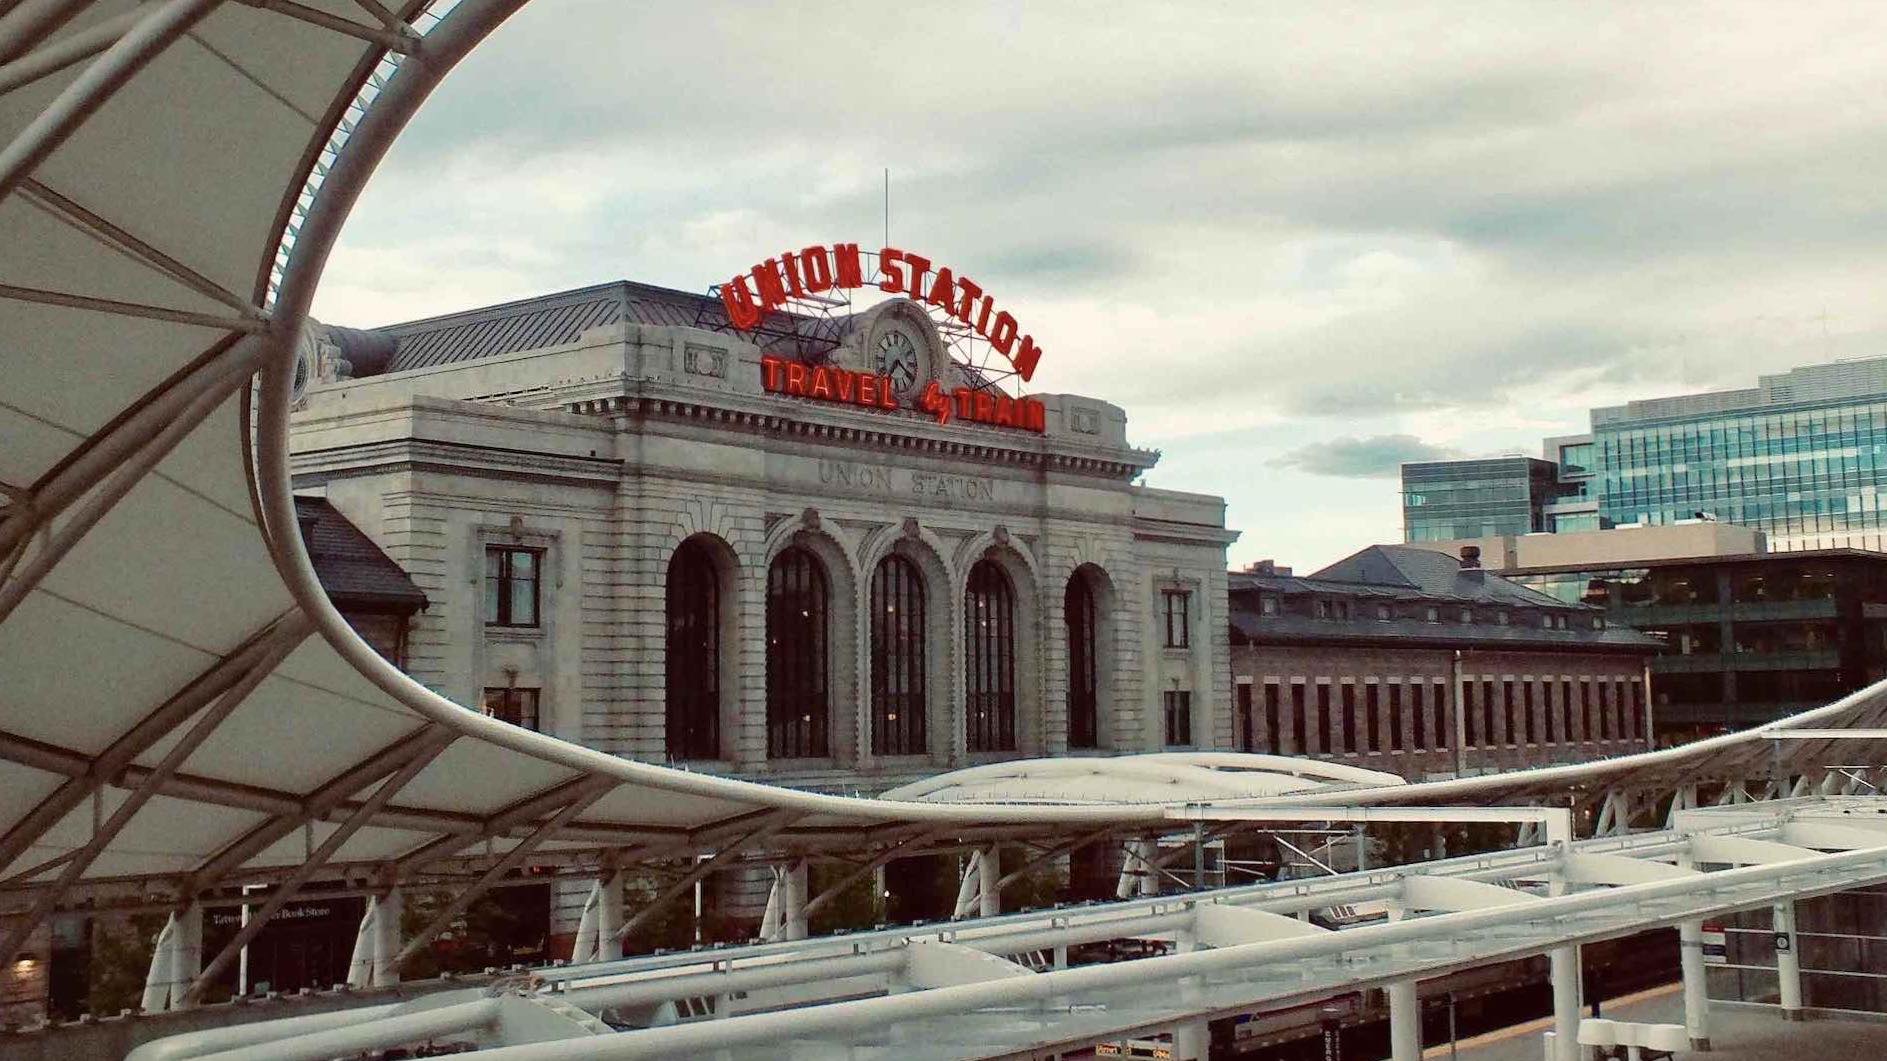 Visiting Union Station is one of the top things to do in downtown Deenver - pieter-van-de-sande 